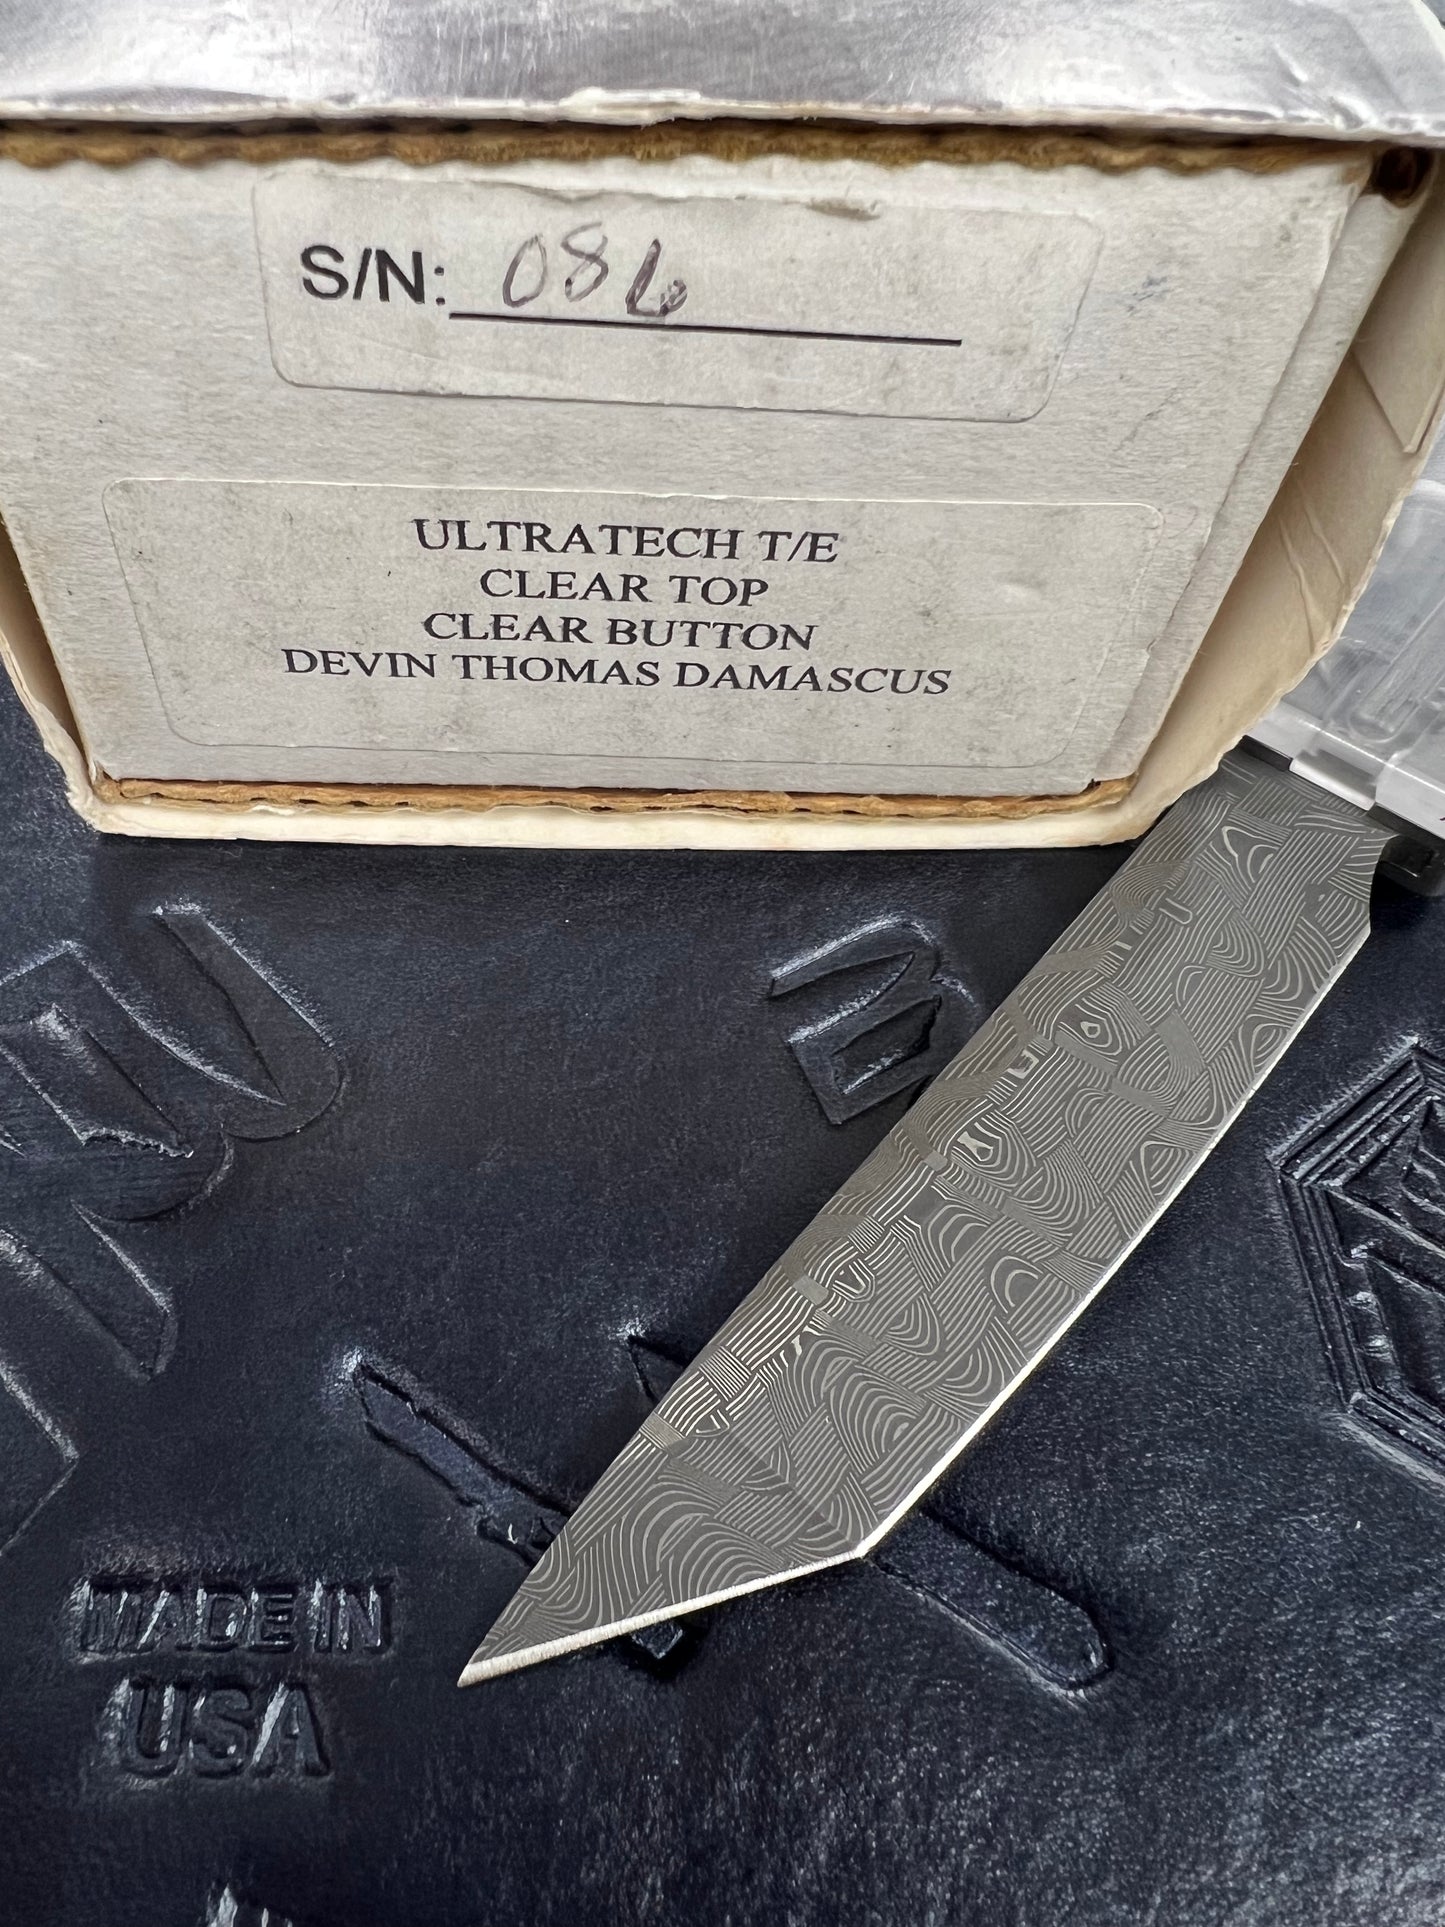 Pre Owned Microtech Ultratech Tanto T/E Clear Top Clear Button Devin Thomas Damascus SN:086 See Pics